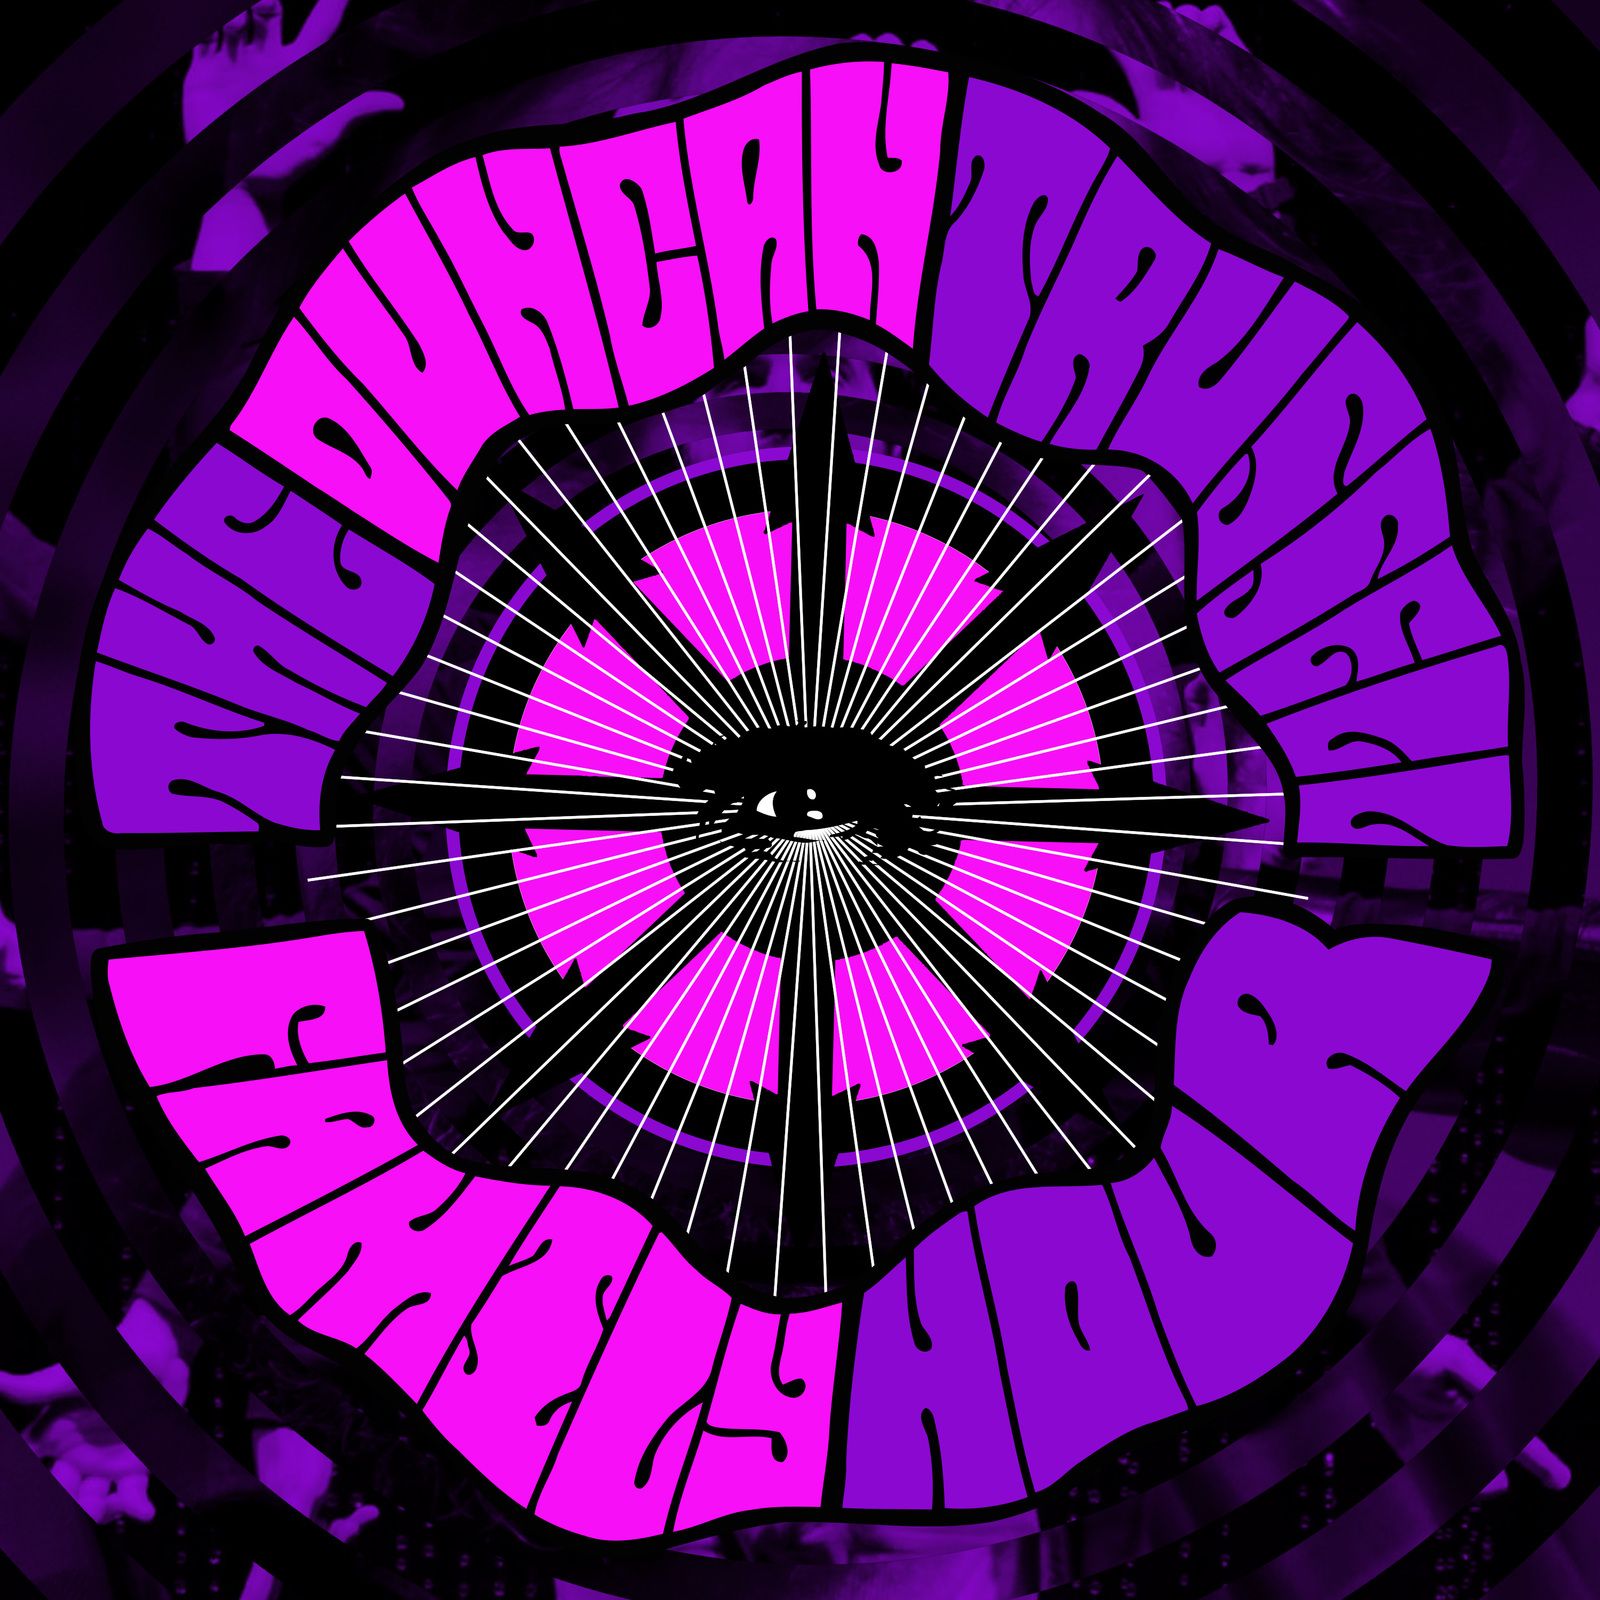 Support Duncan Trussell on Patreon